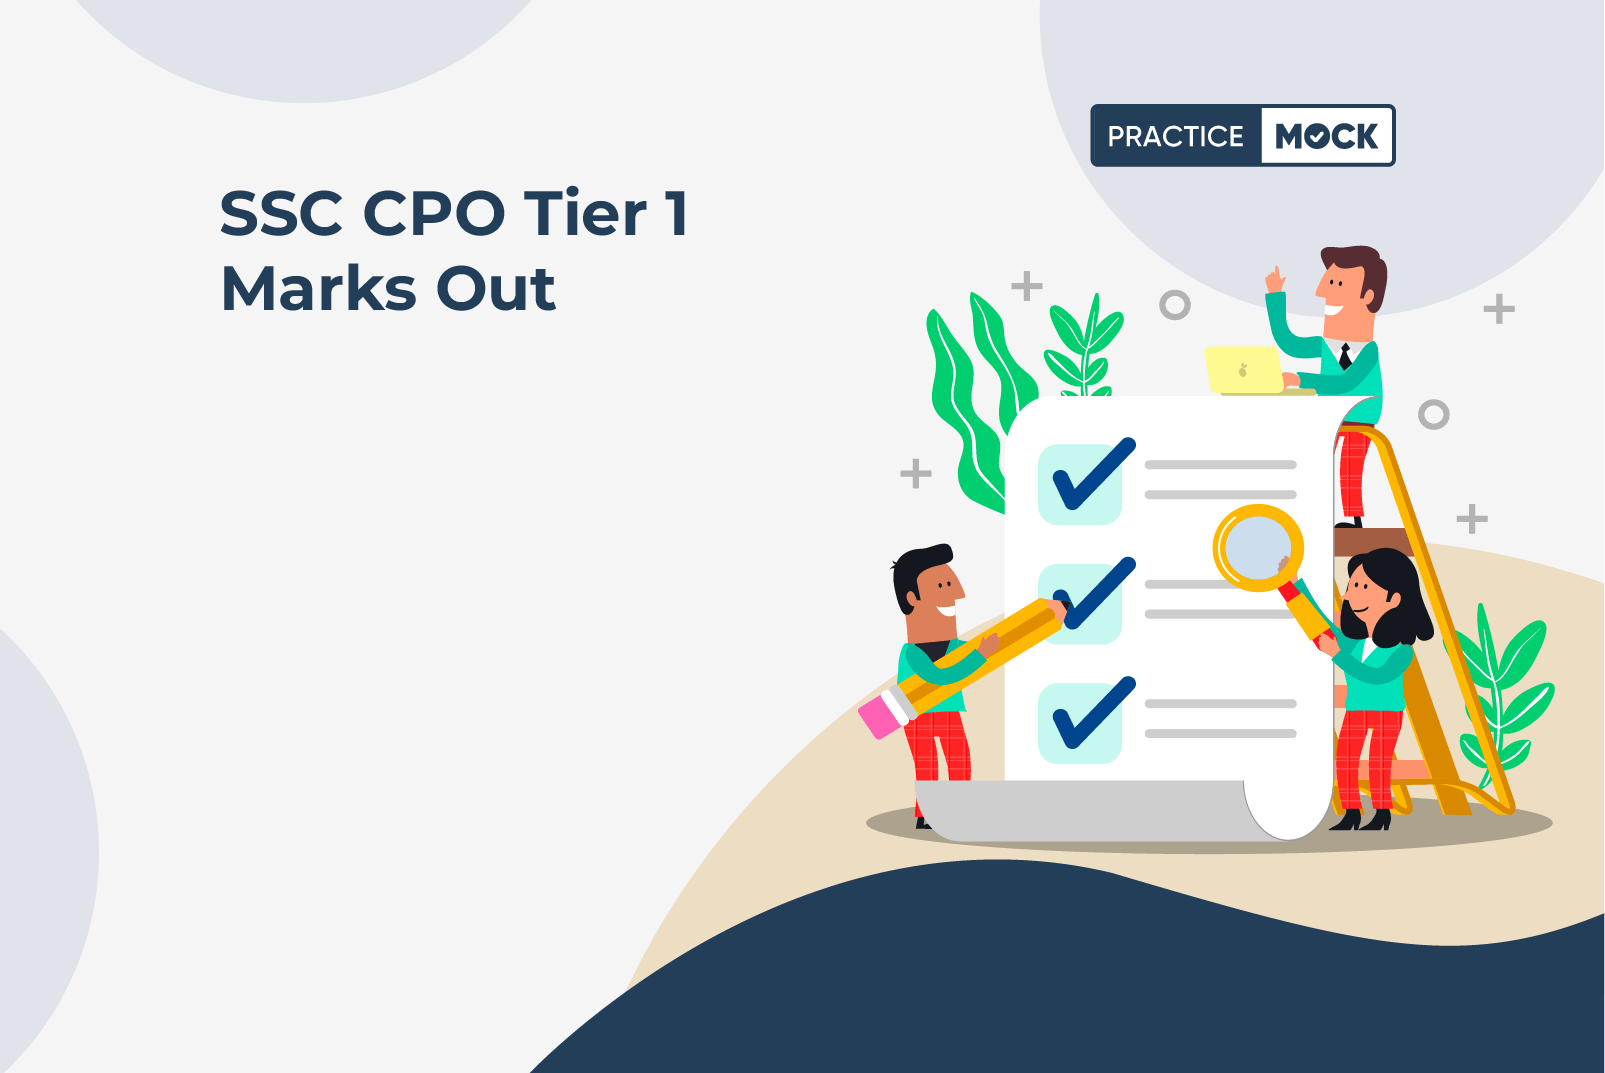 SSC CPO Tier 1 Marks Out (1)